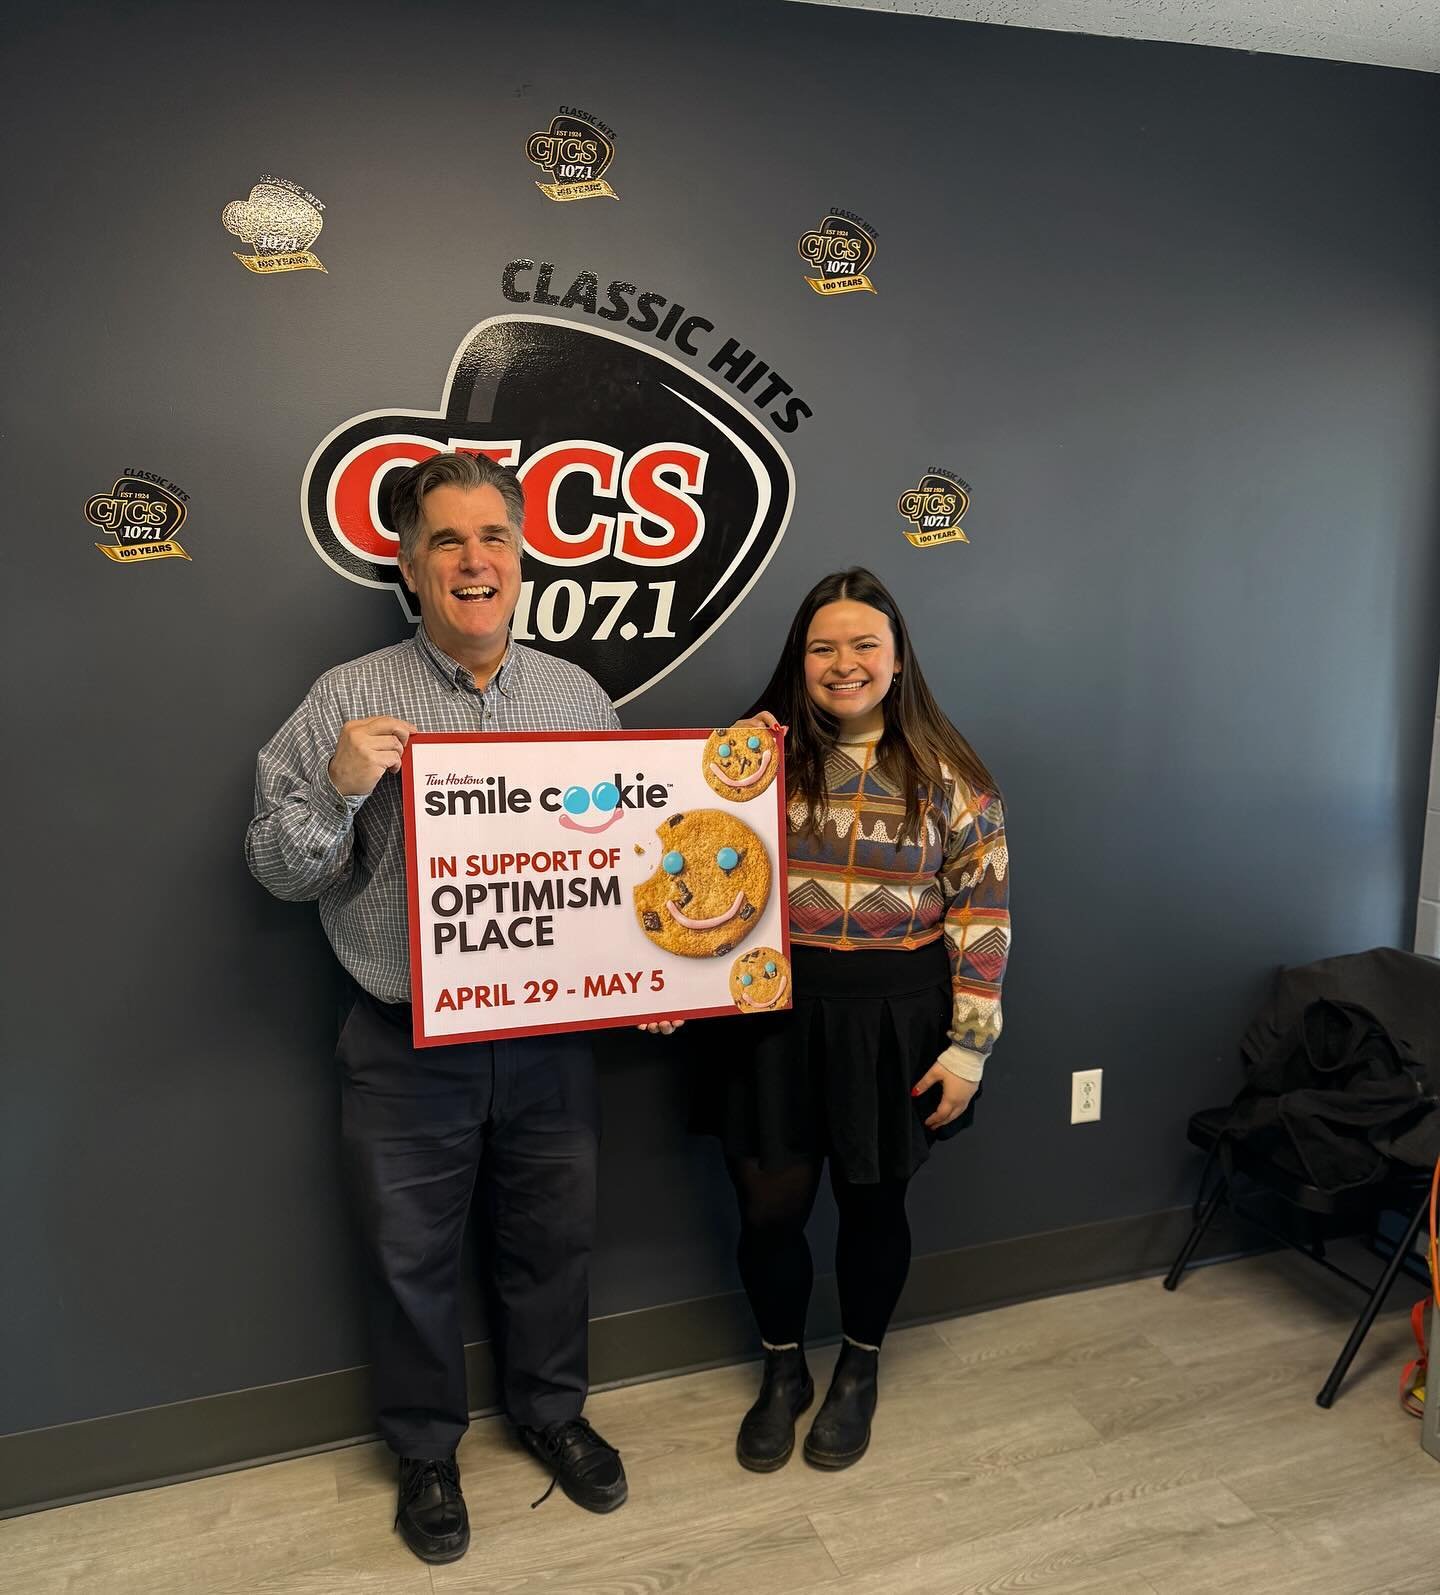 Did you hear us on @1071cjcs today?! Todays topic: Smile Cookie 🍪⬇️

3 days until you can get your hands on delicious AND charitable smile cookies 🙌🏼

➡️ pre order using the link in our bio!